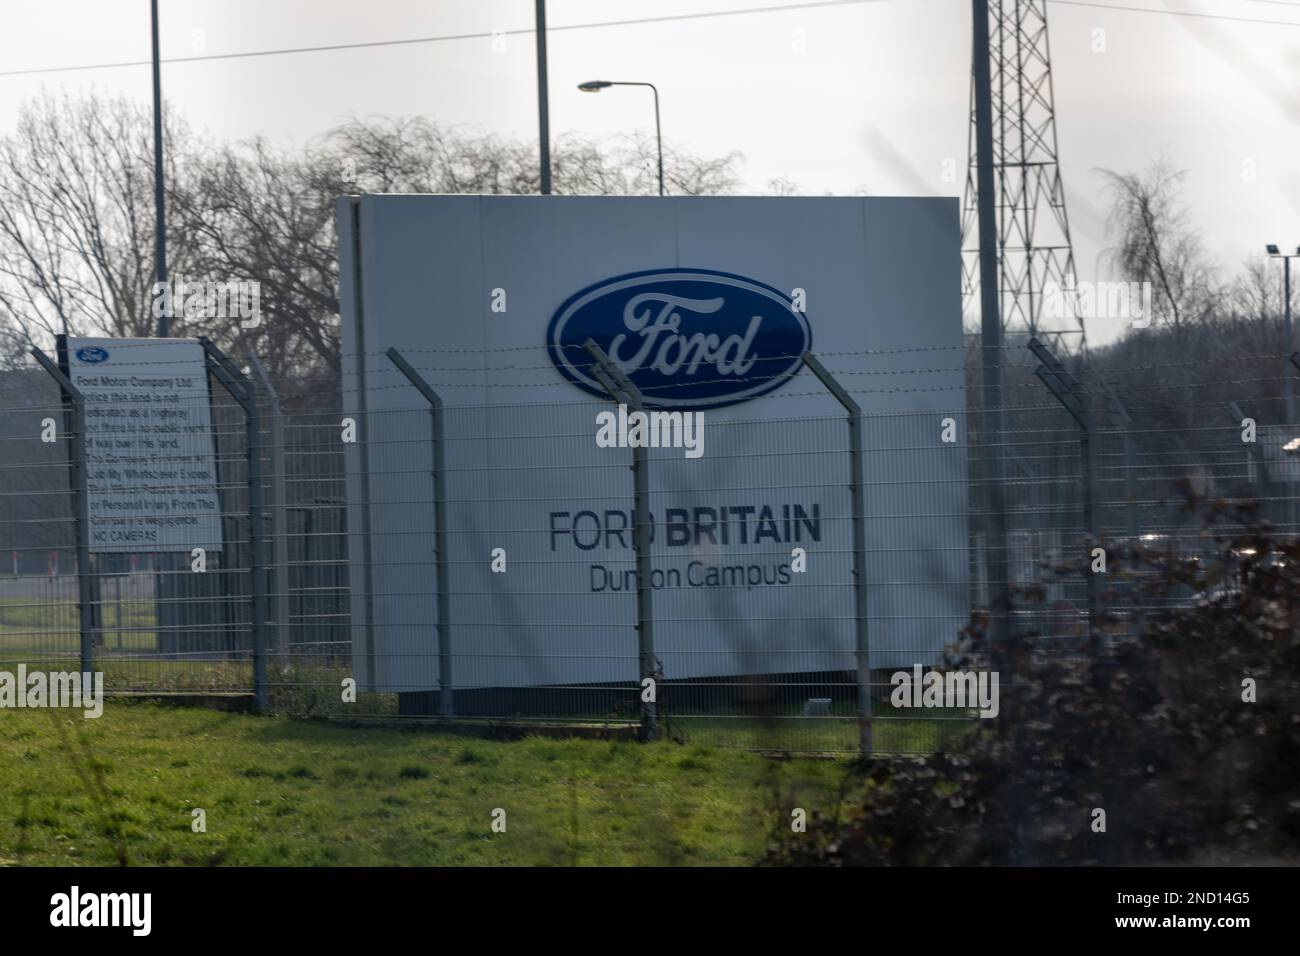 Basildon, UK. 15th Feb, 2023. Dunton Essex 15th Feb 2023 It is reported that it is possible up to one thousand jobs will be made redundant at the Ford Technical Centre at Dunton Essex as part of a restructuring due to the move to electric vehicles Credit: Ian Davidson/Alamy Live News Stock Photo